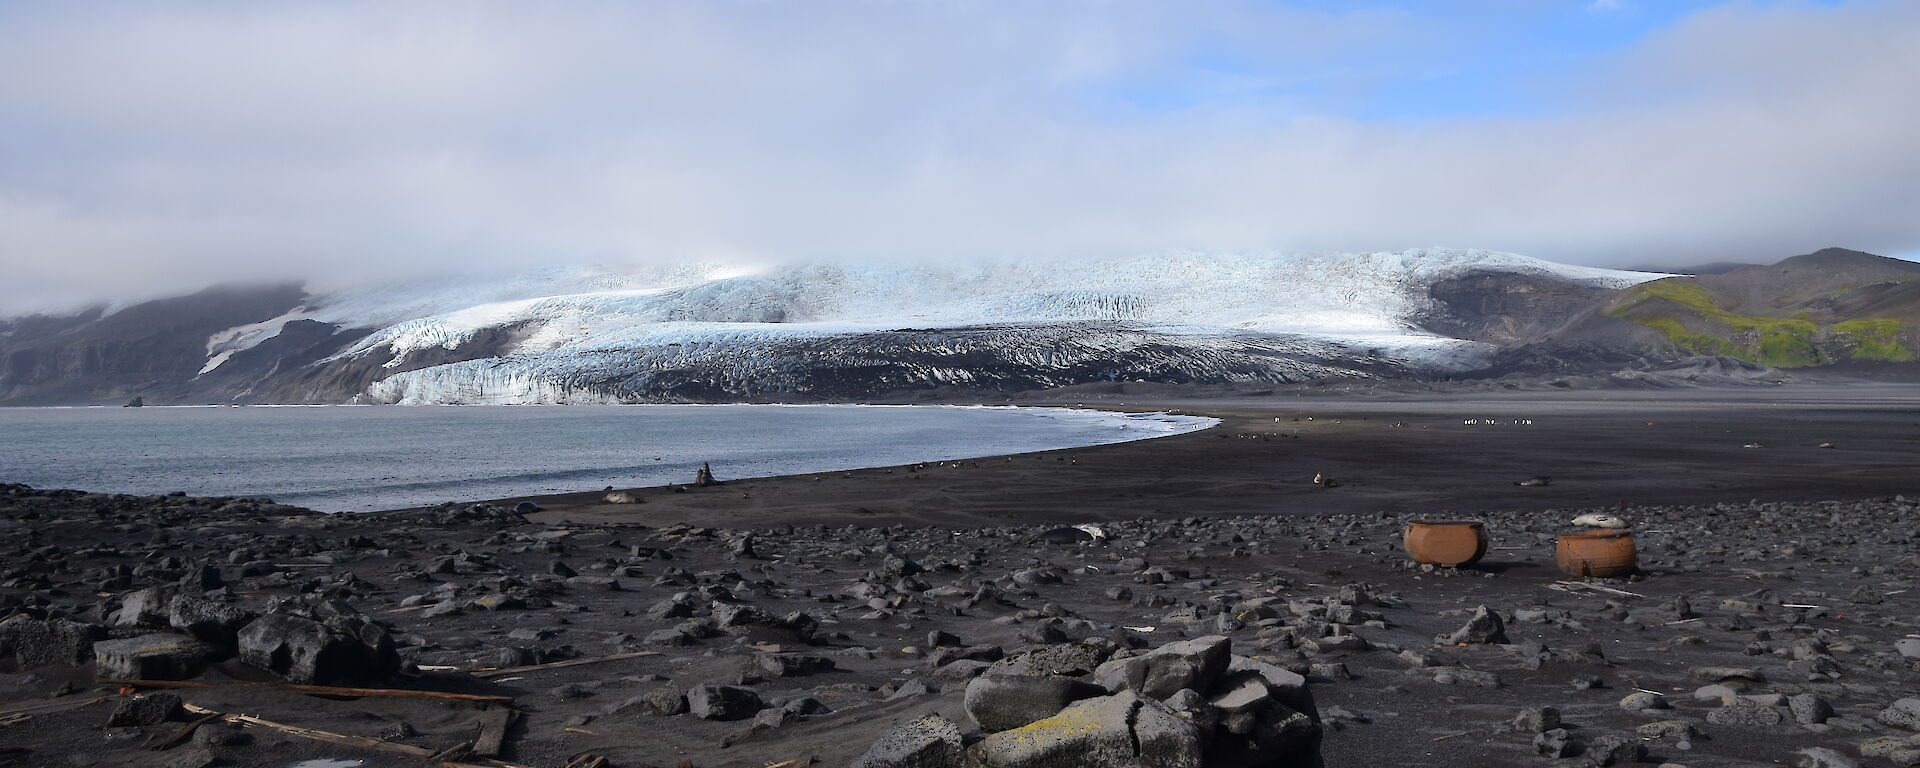 A black sand beach with elephant seals and two trypots, and ice-covered Stephenson Glacier in the background.